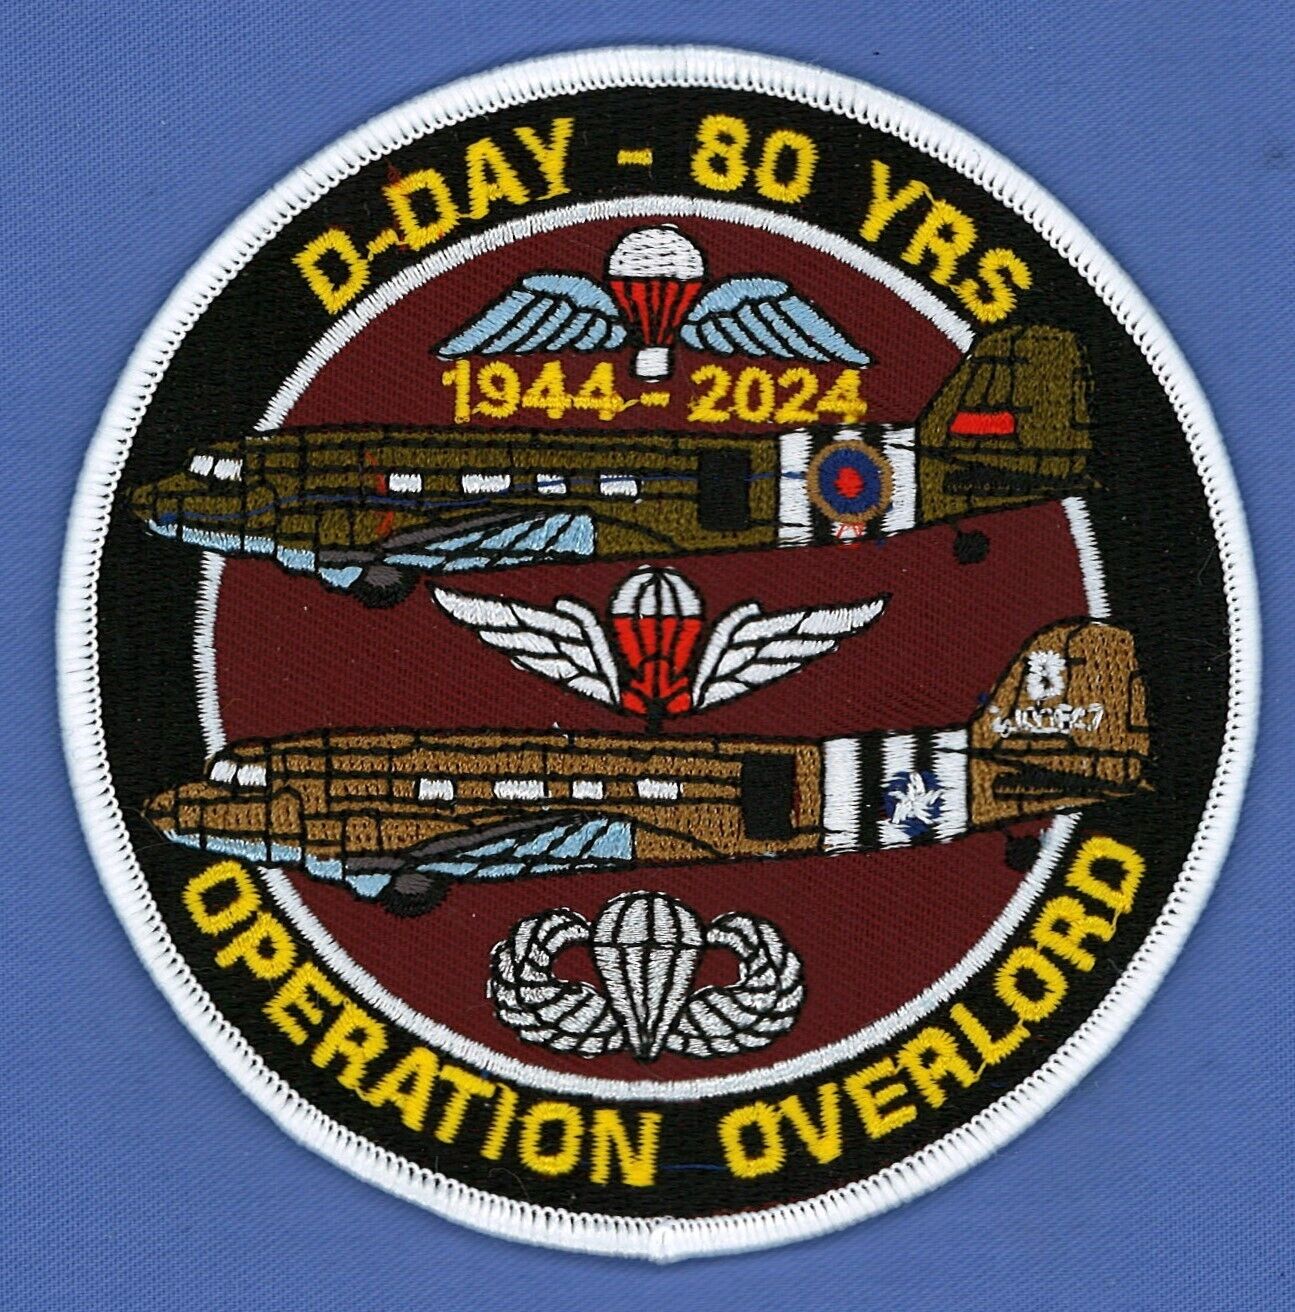 D-DAY LANDINGS - OP OVERLORD 80TH ANNIVERSARY EMBROIDERED BADGE / PATCH